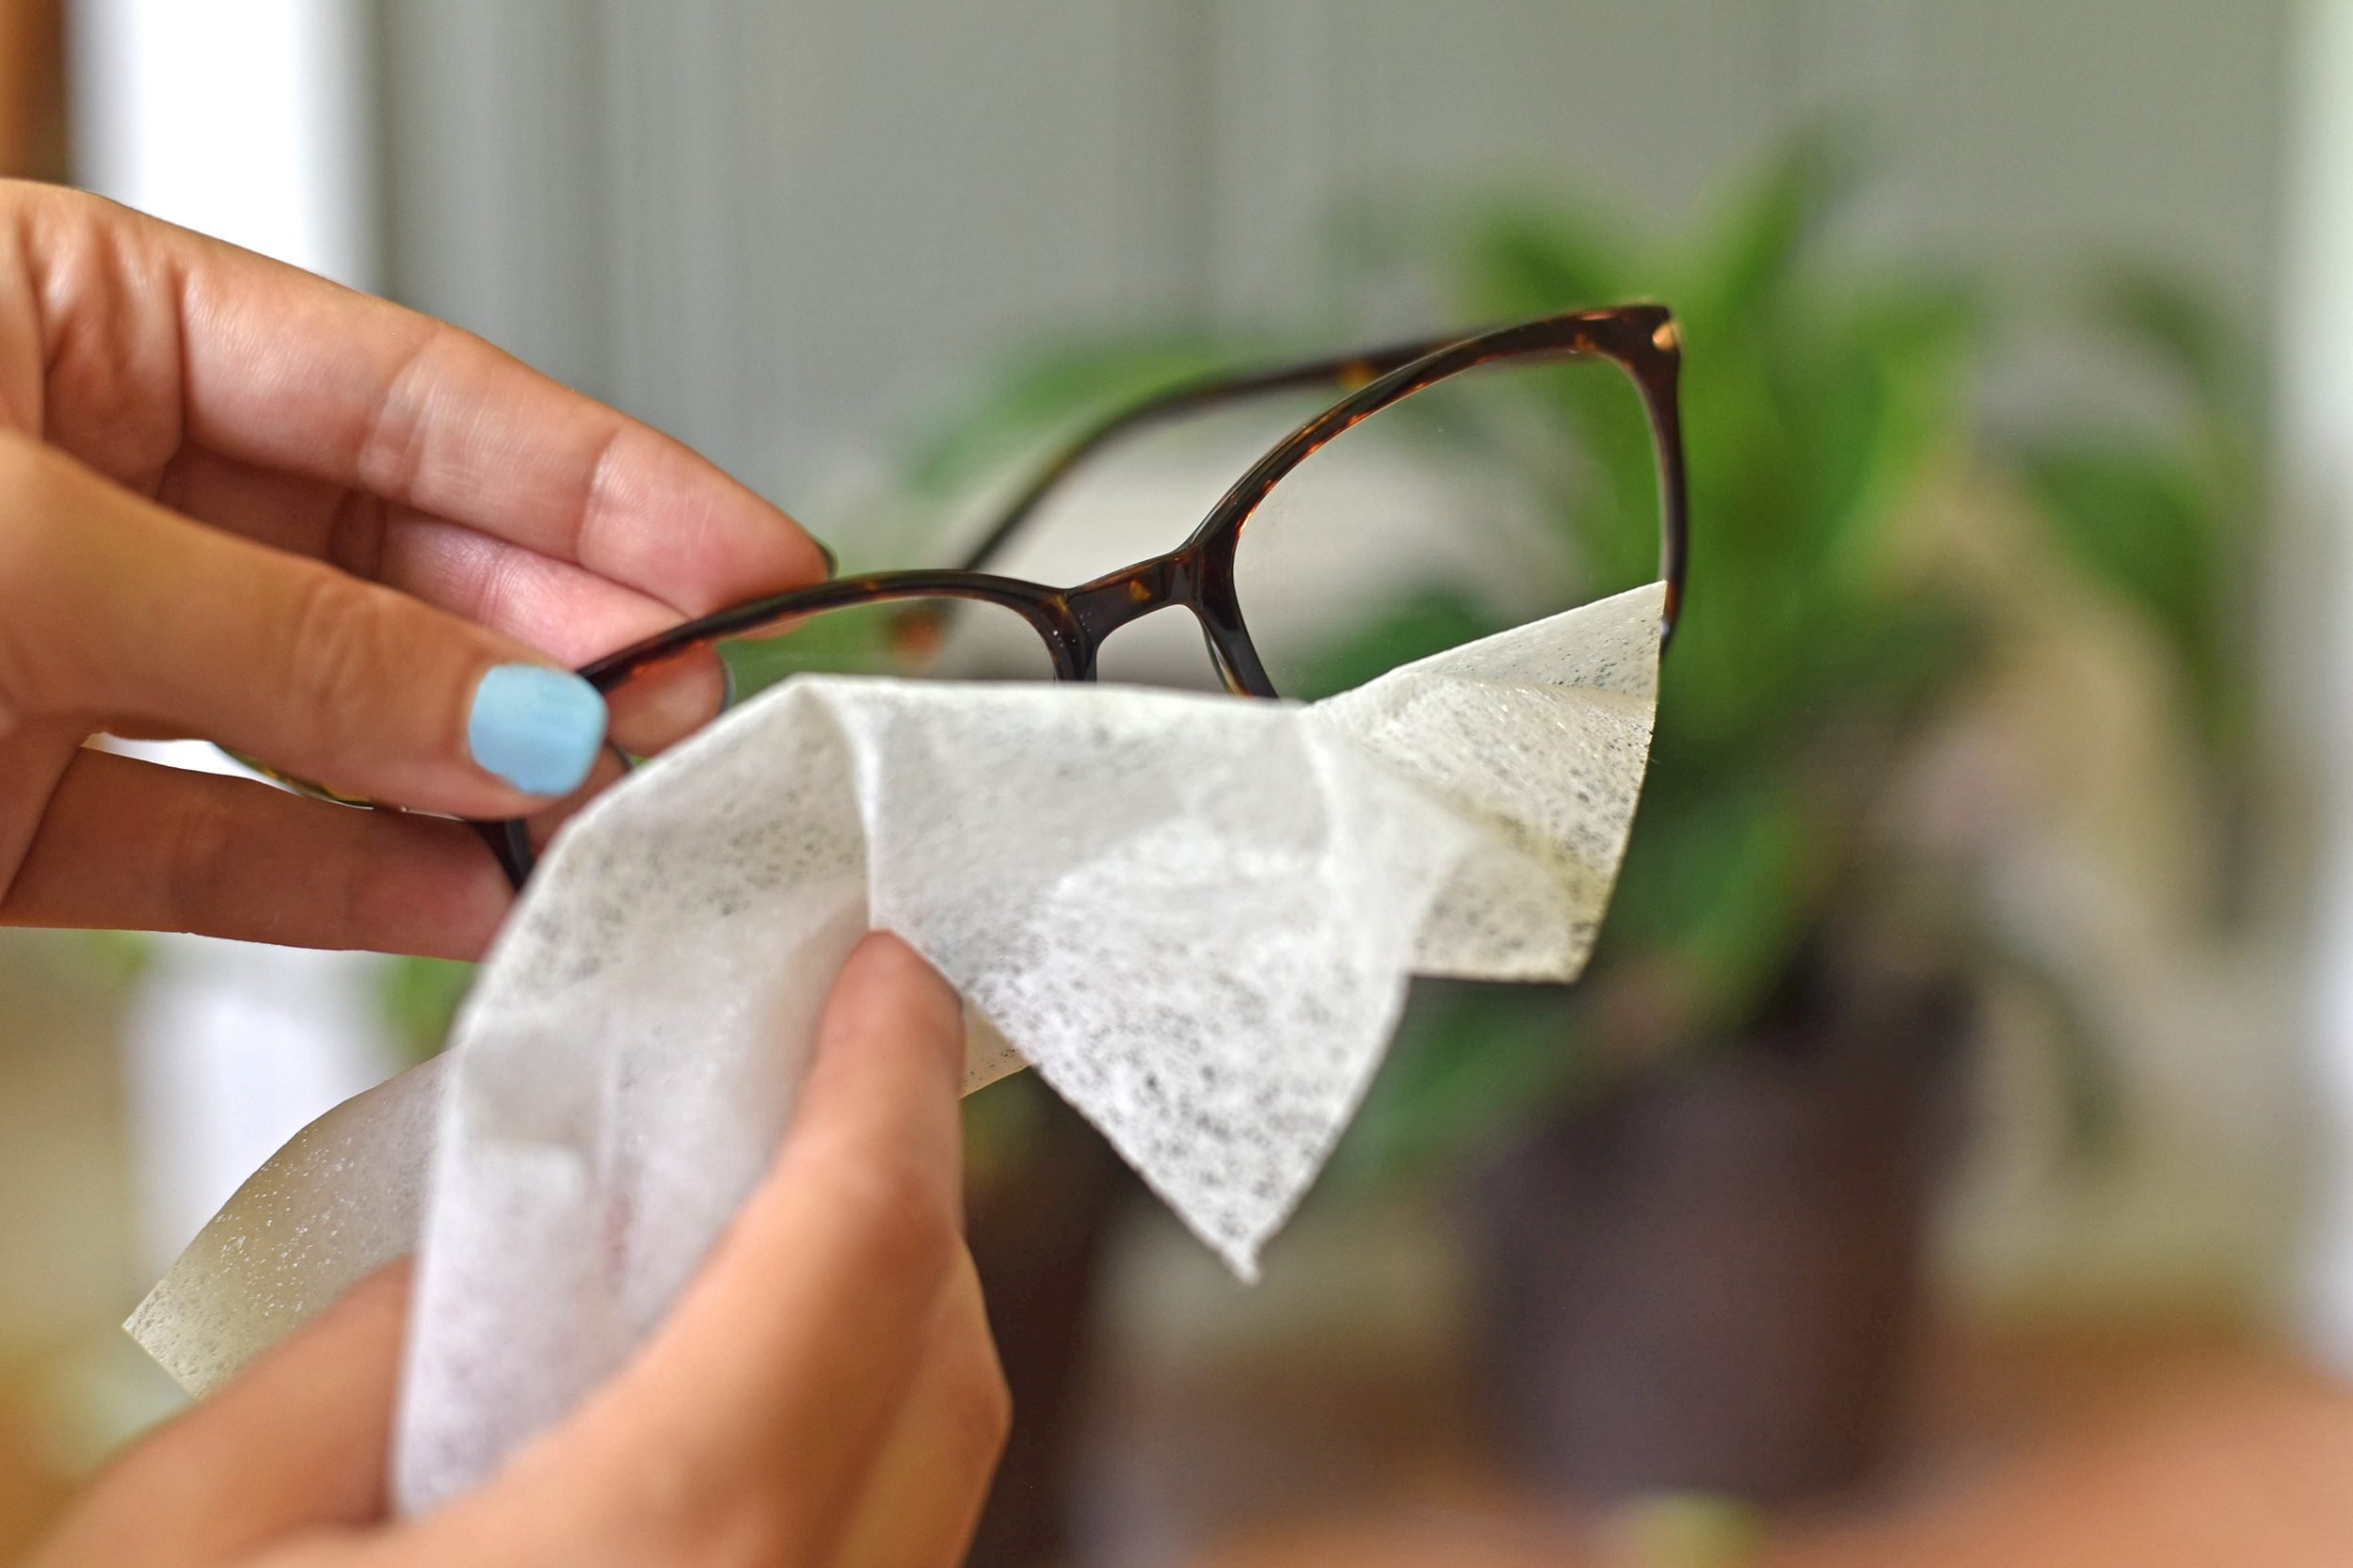 Safe Cleaning Glasses Wipes For Lenses & Glasses - Softer Paper Co